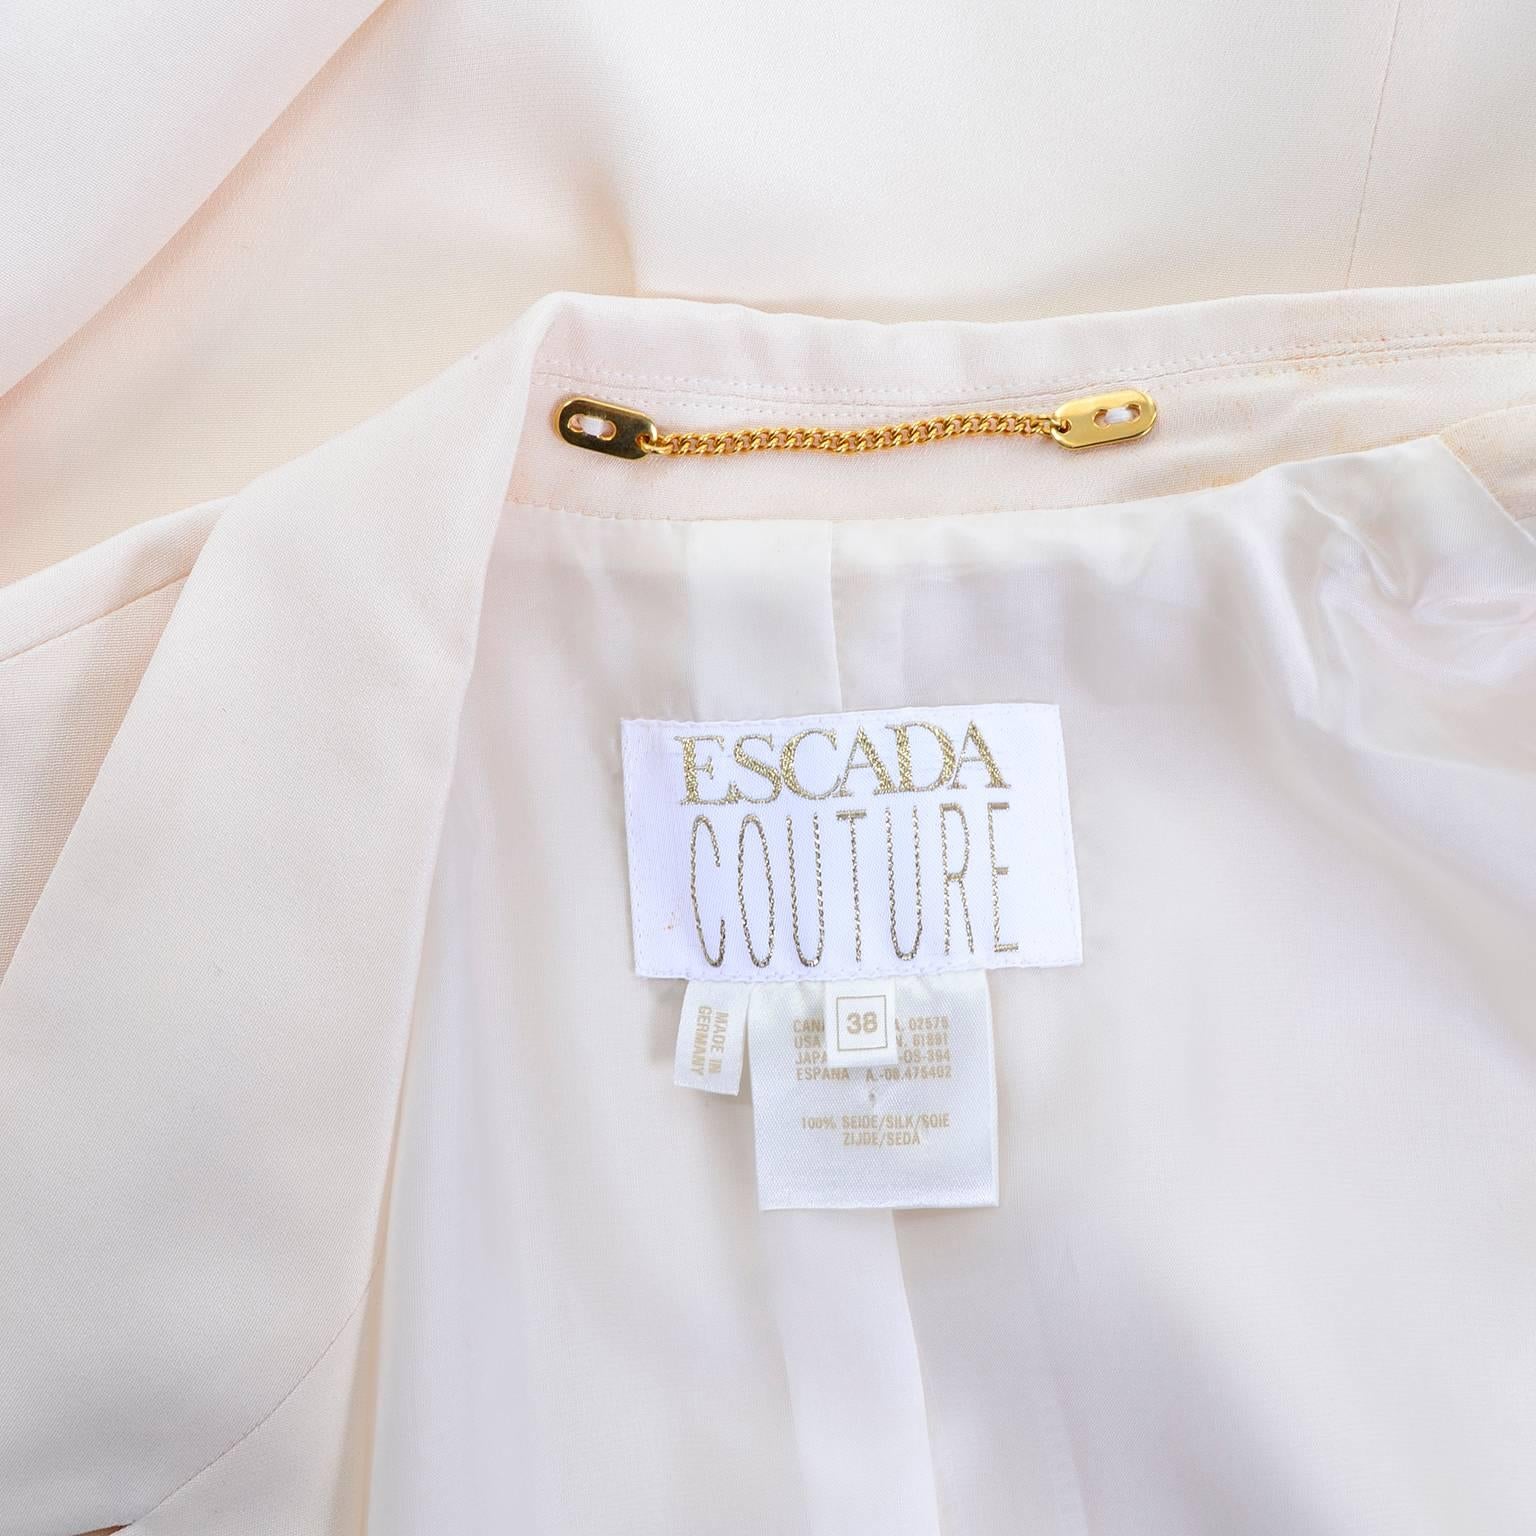 Vintage Escada Couture Creamy Ivory Silk Evening Coat Gold Rhinestone Buttons 38 In Excellent Condition For Sale In Portland, OR